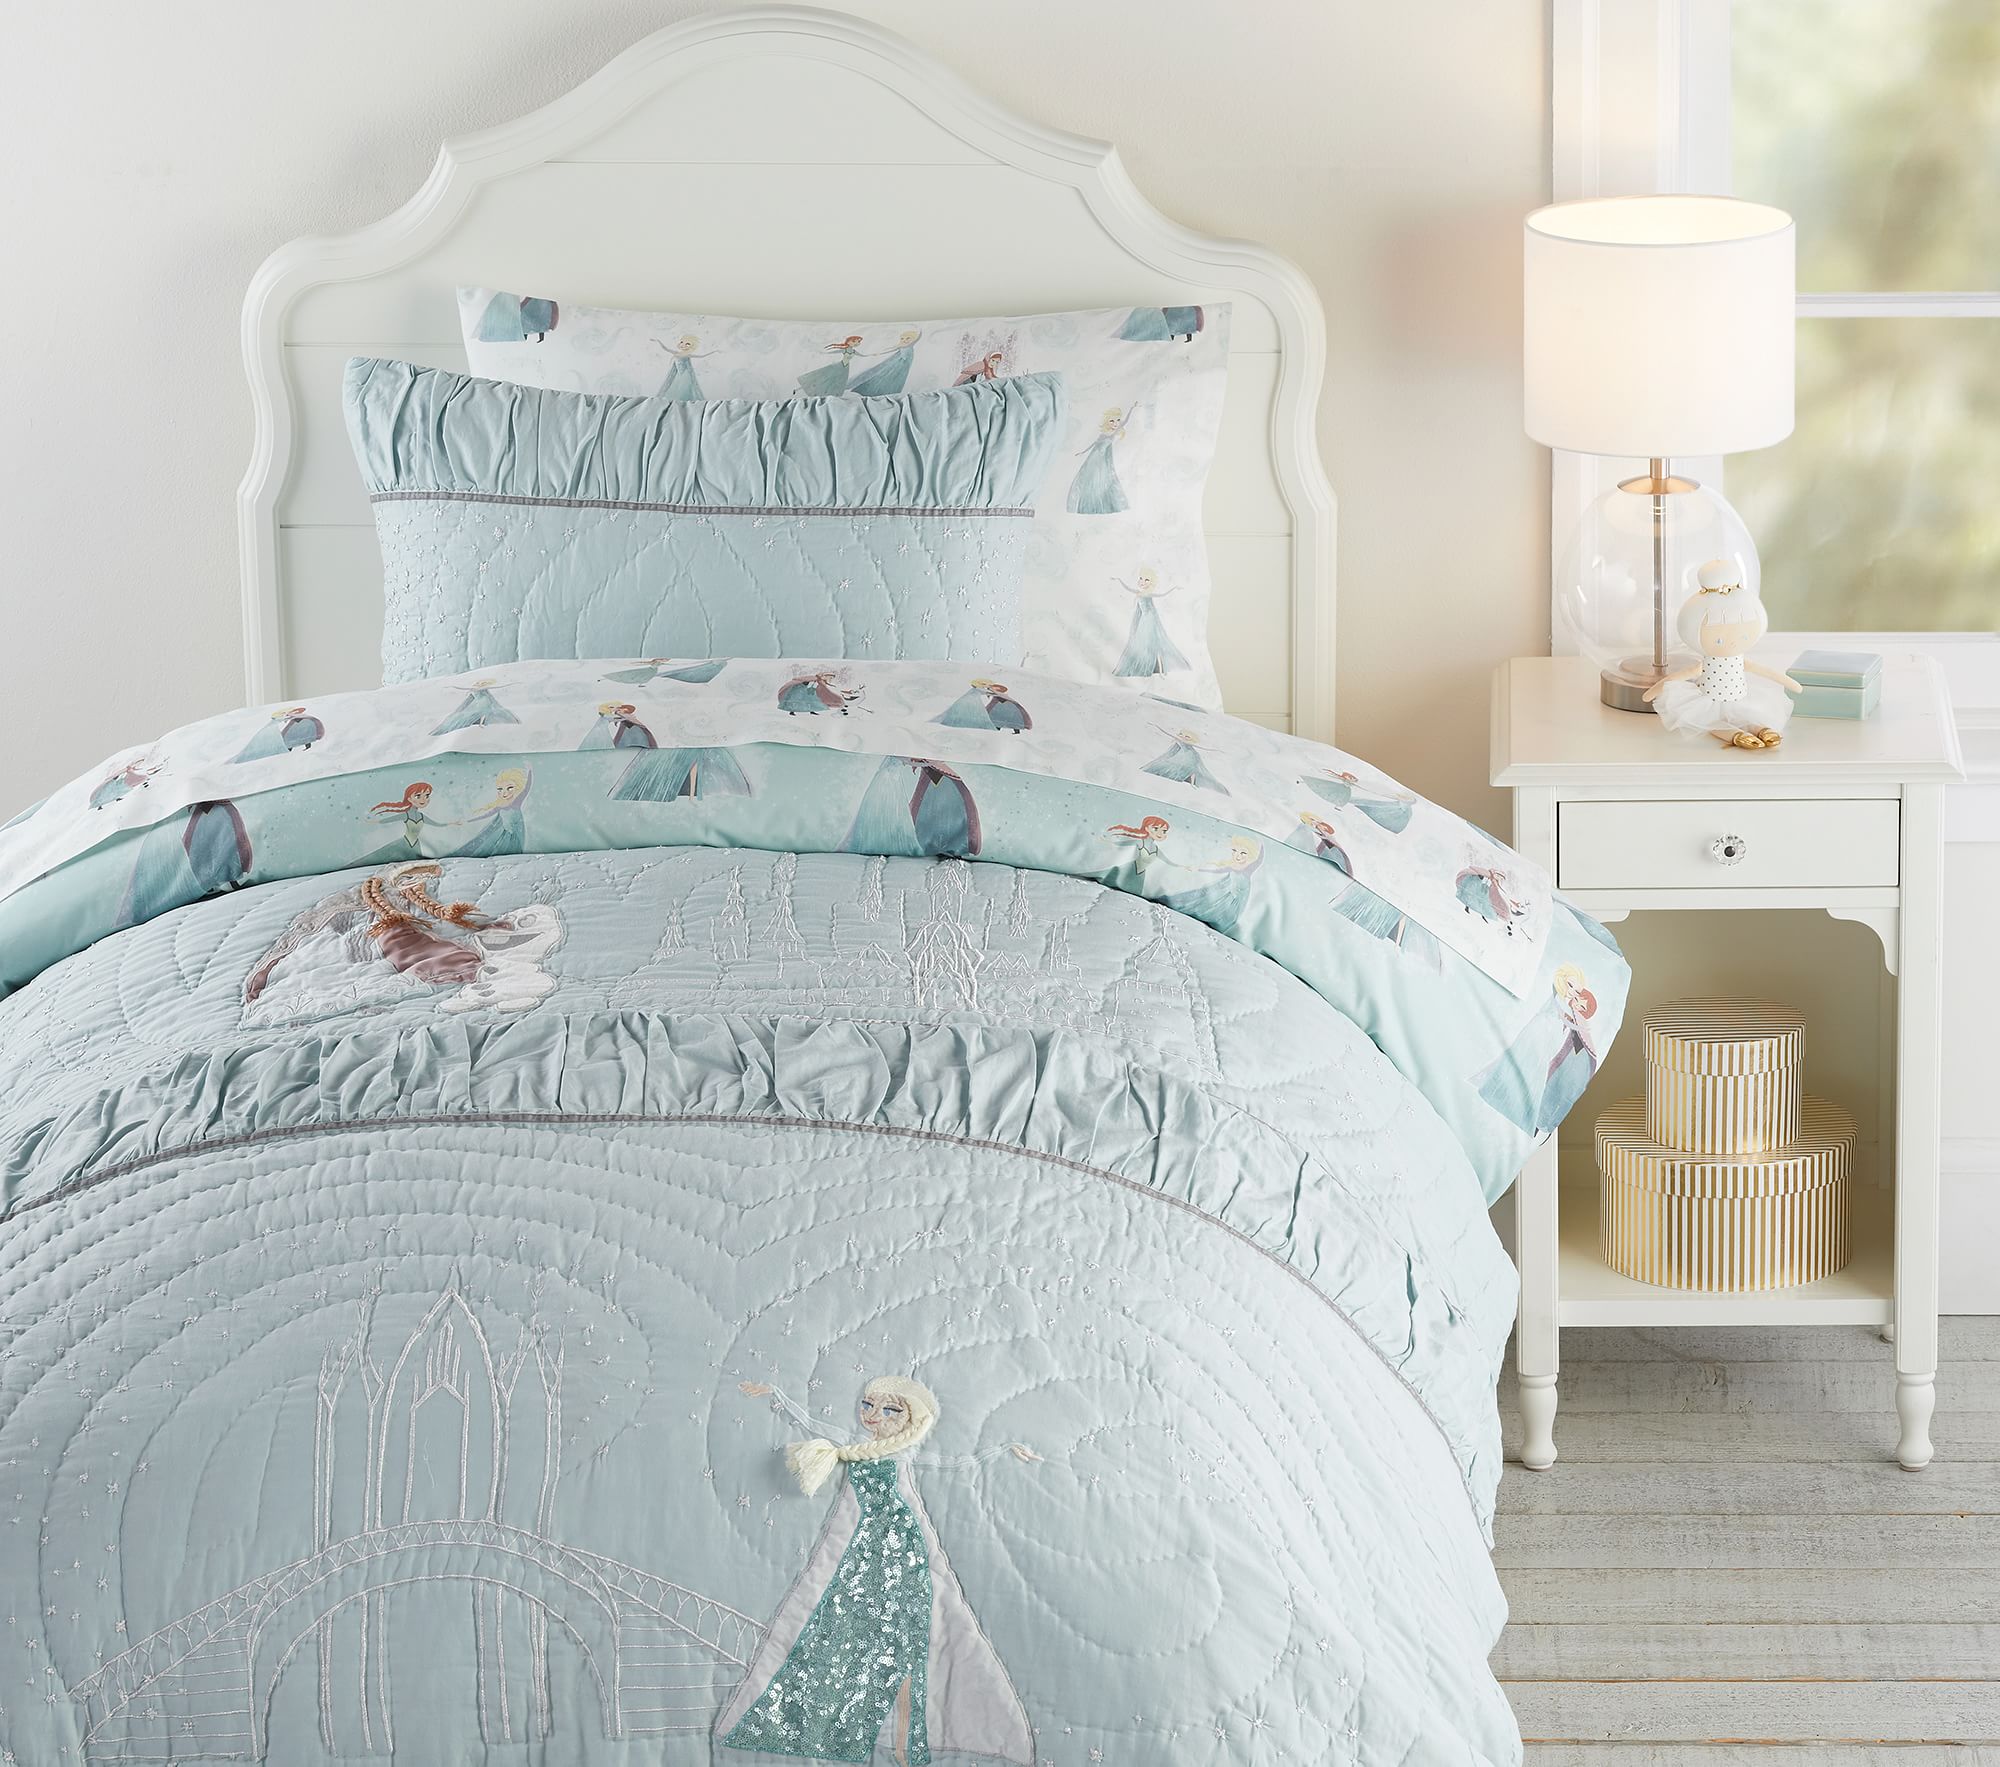 Give Your Room A Royal Makeover With Pottery Barn Frozen Bedding